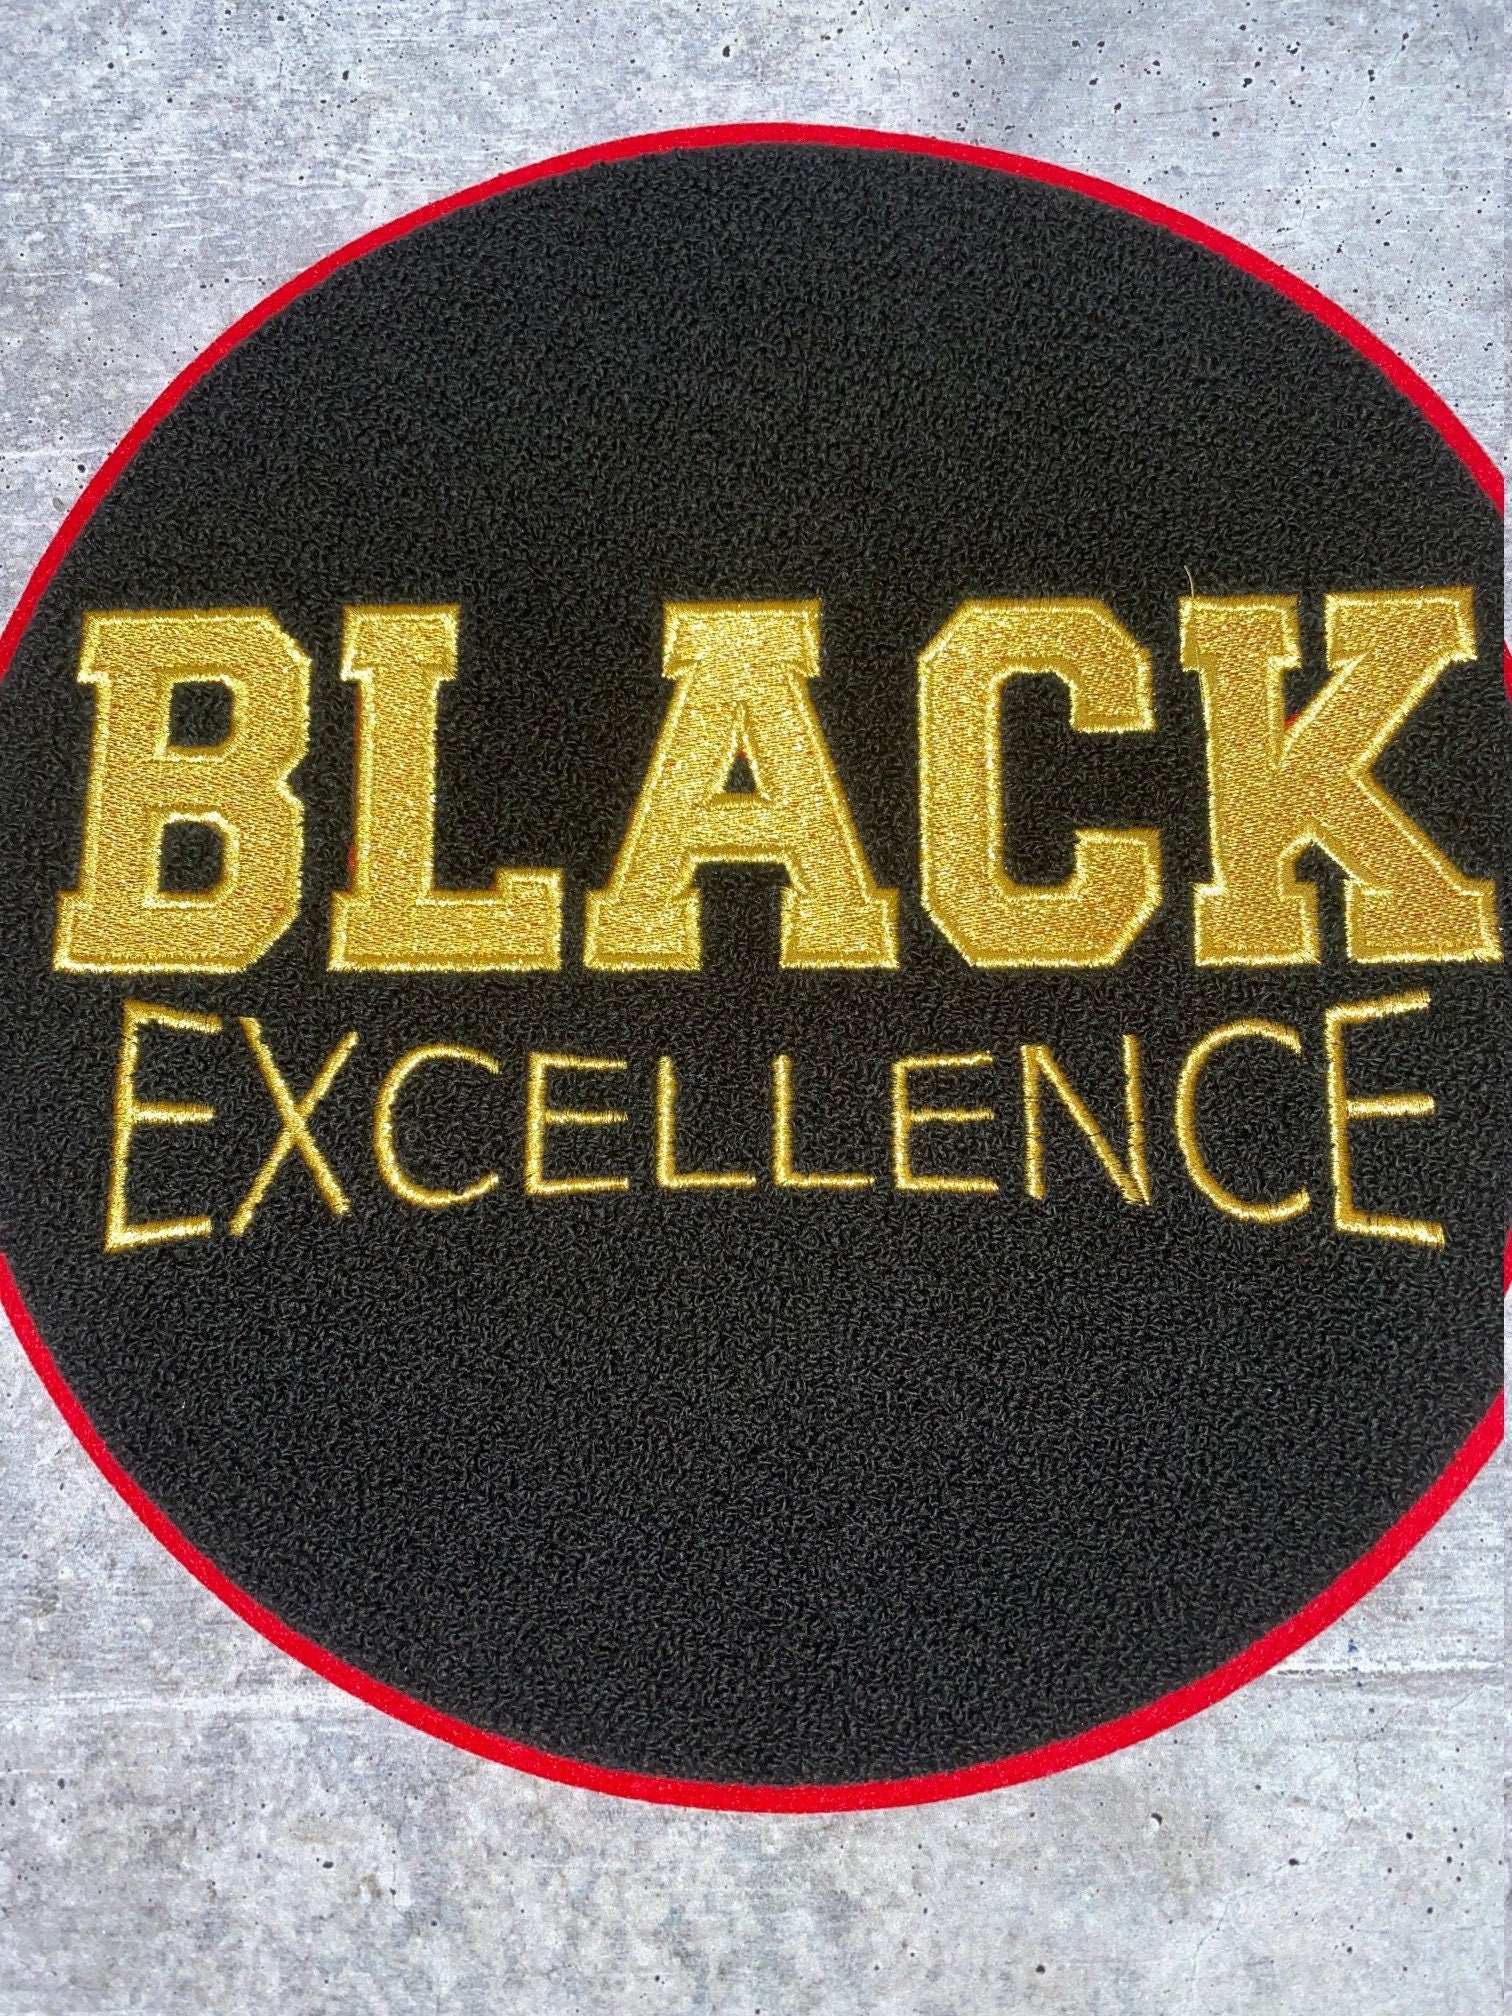 NEW, Chenille, "Black Excellence," LARGE Patch for Jackets or Hoodies, Size 10", Metallic Gold Wording, Red Border, Black History Month